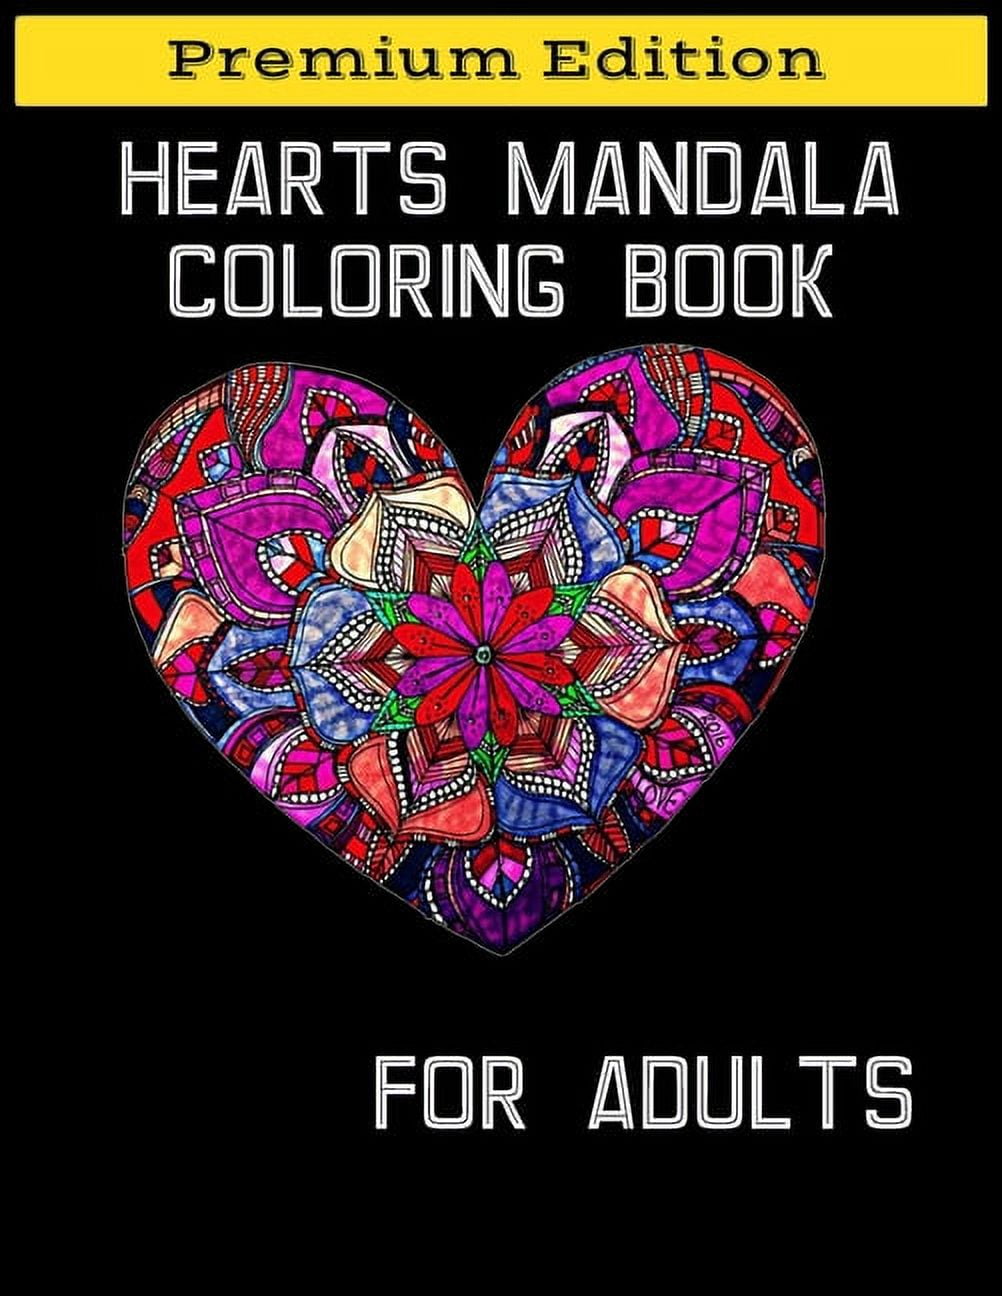 Adult Coloring Books Set - 3 for Grownups 120 Unique Animals, Scenery &  Mandalas Designs. Adults Relaxation.